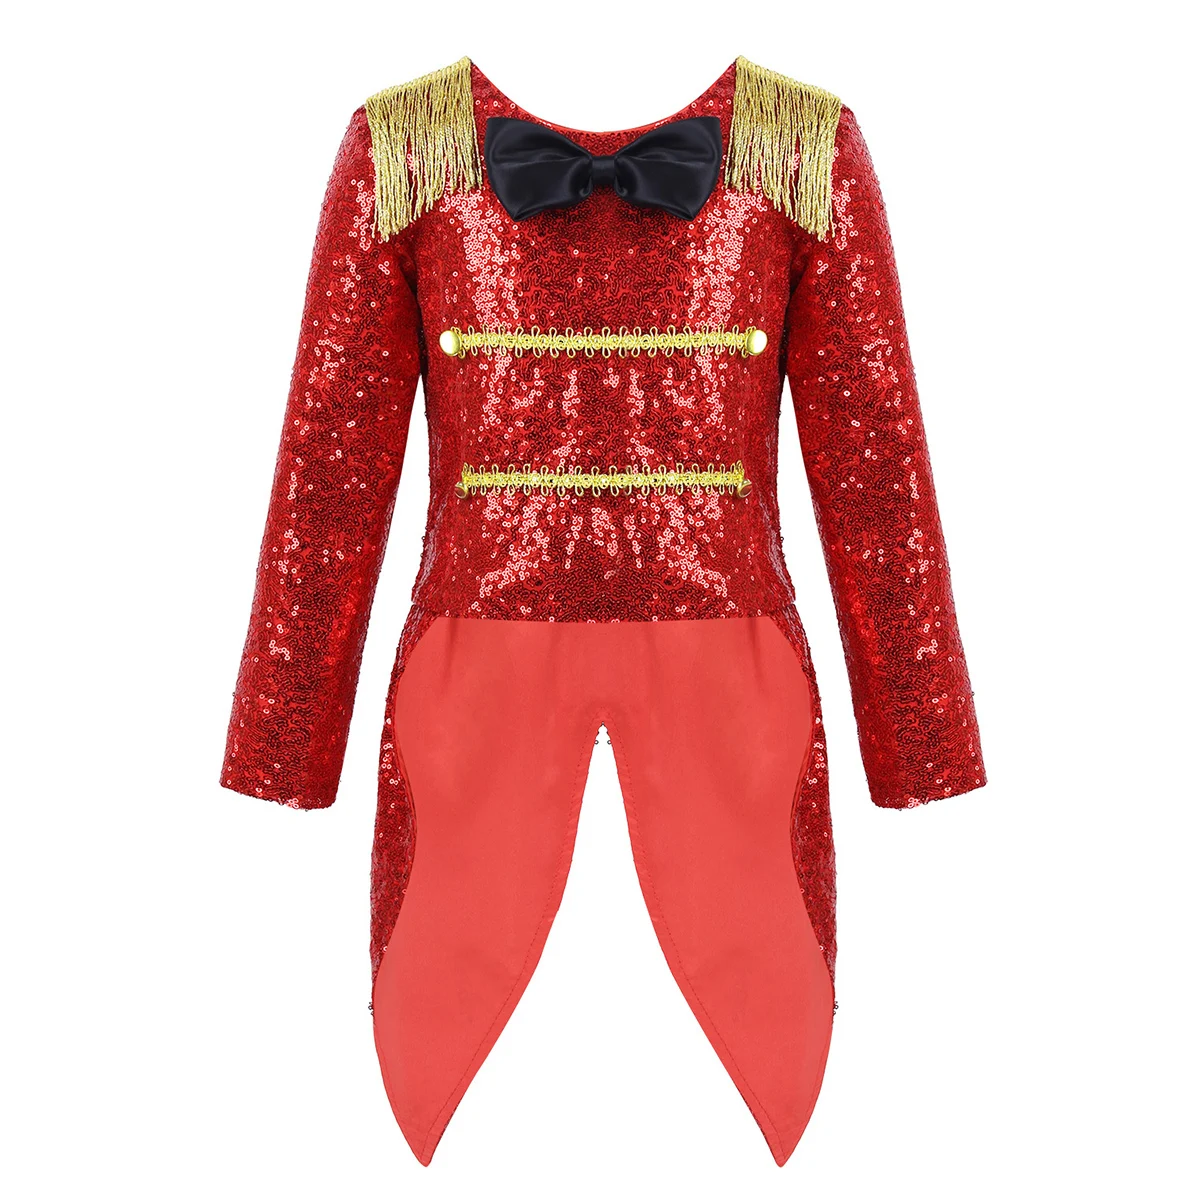 Kids Girls Ringmaster Costume Dancewear Halloween Cosplay Party Dress Up Clothes 